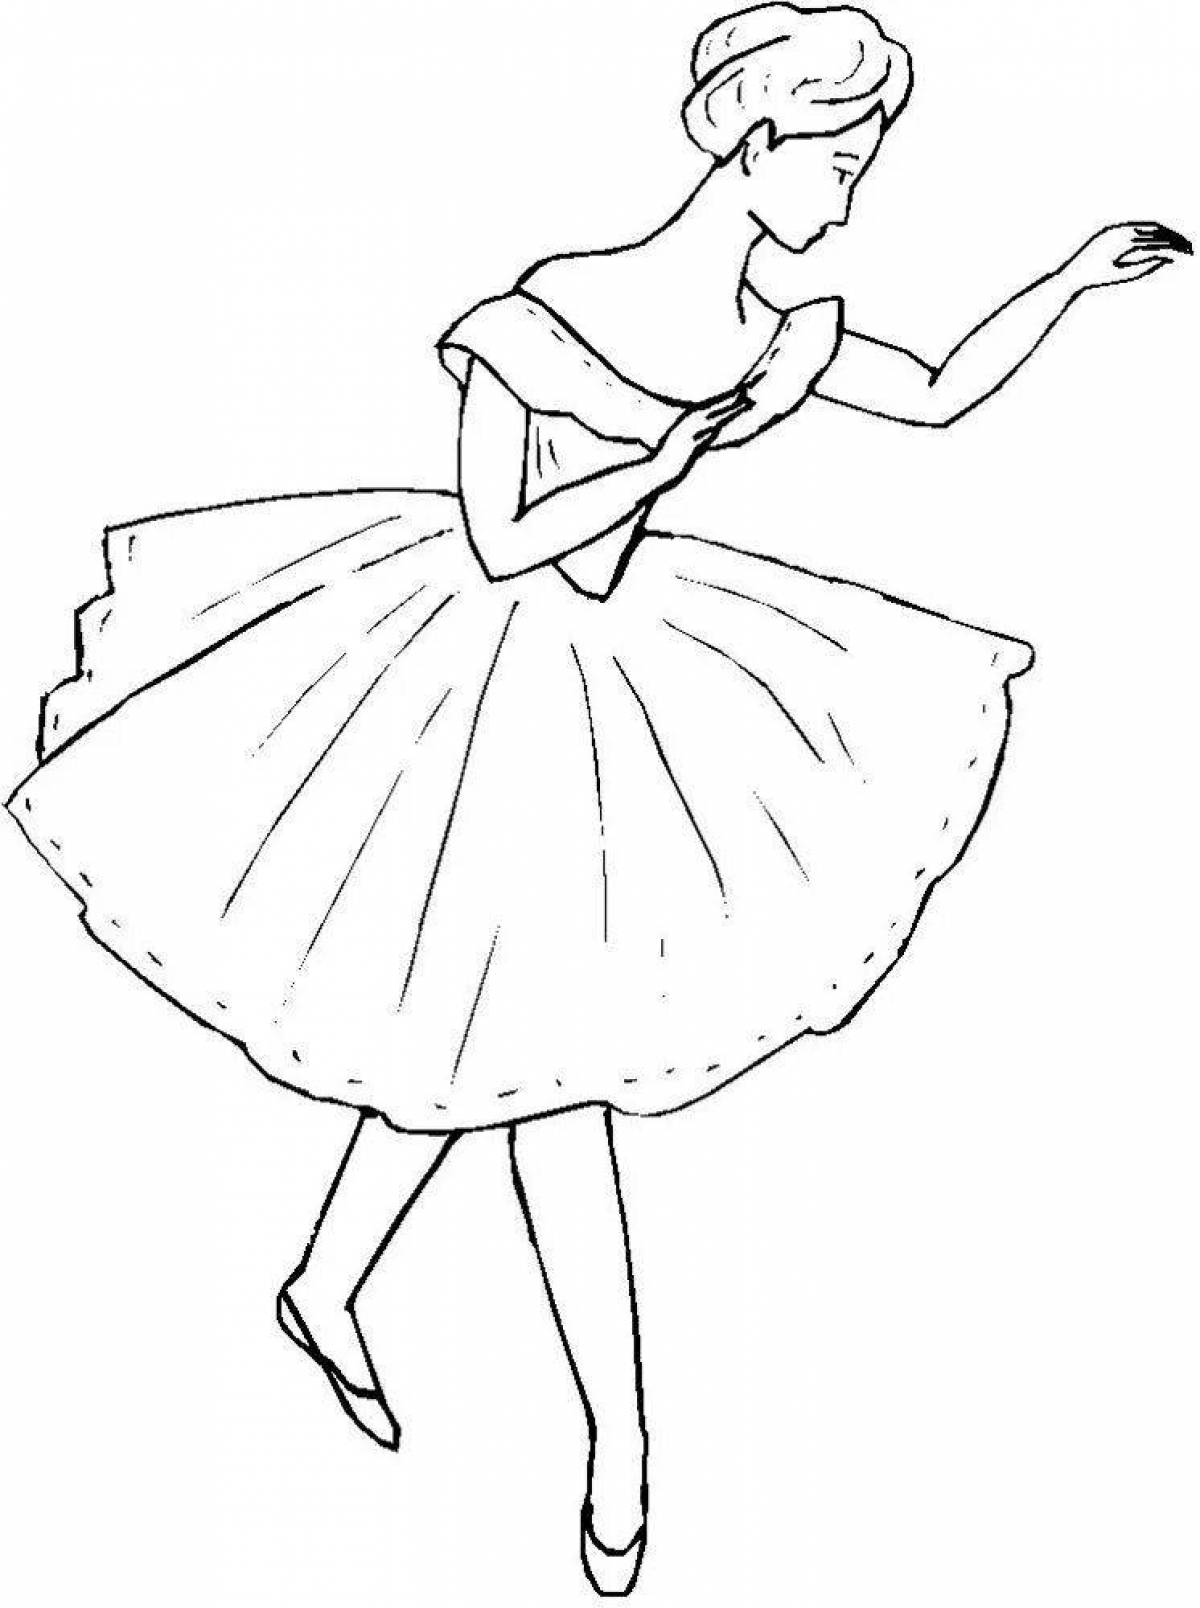 Coloring page bright dancer